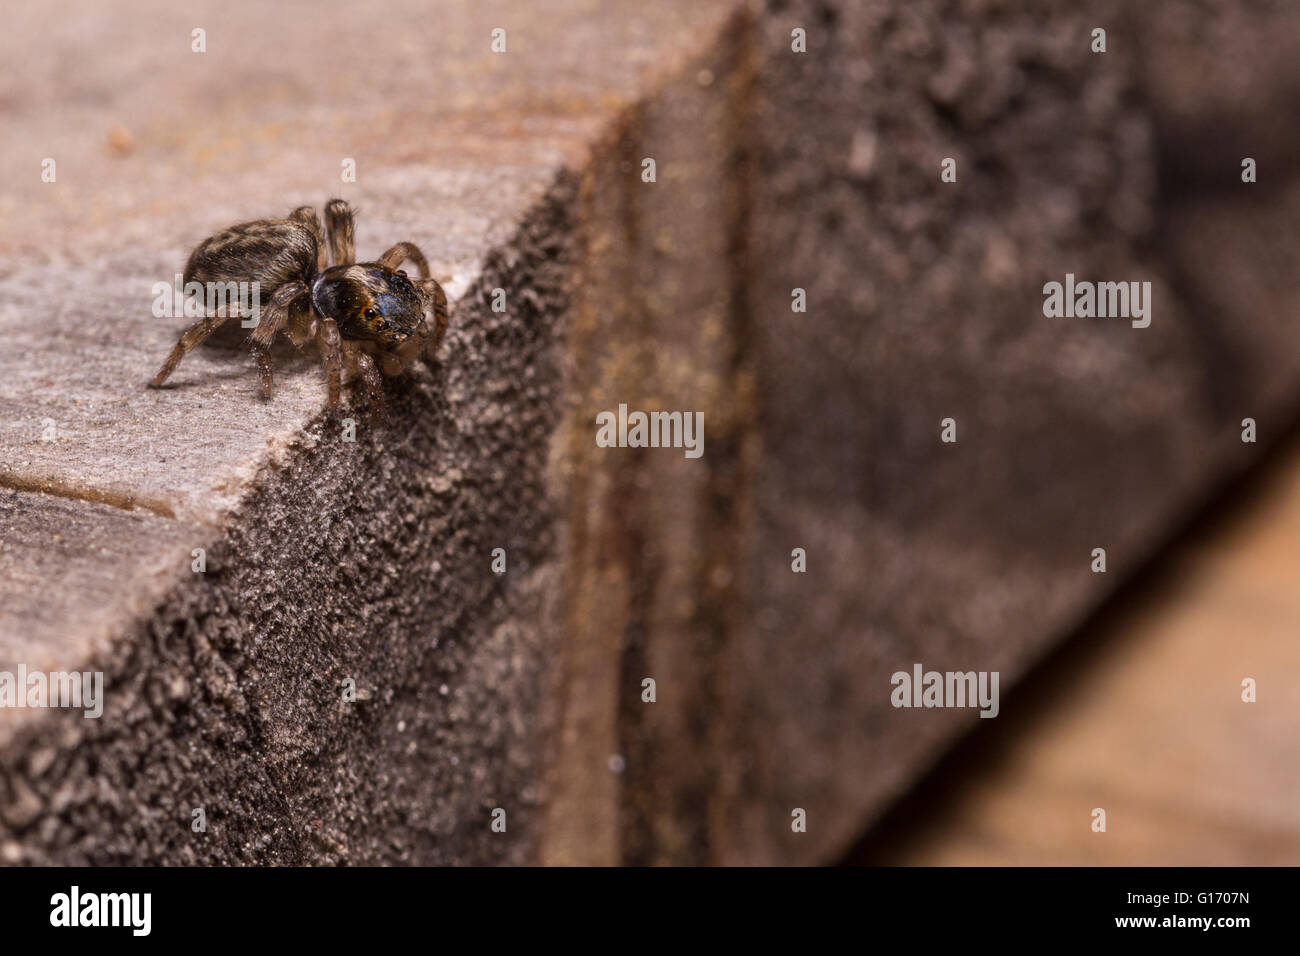 A spider jump at wood plank Stock Photo